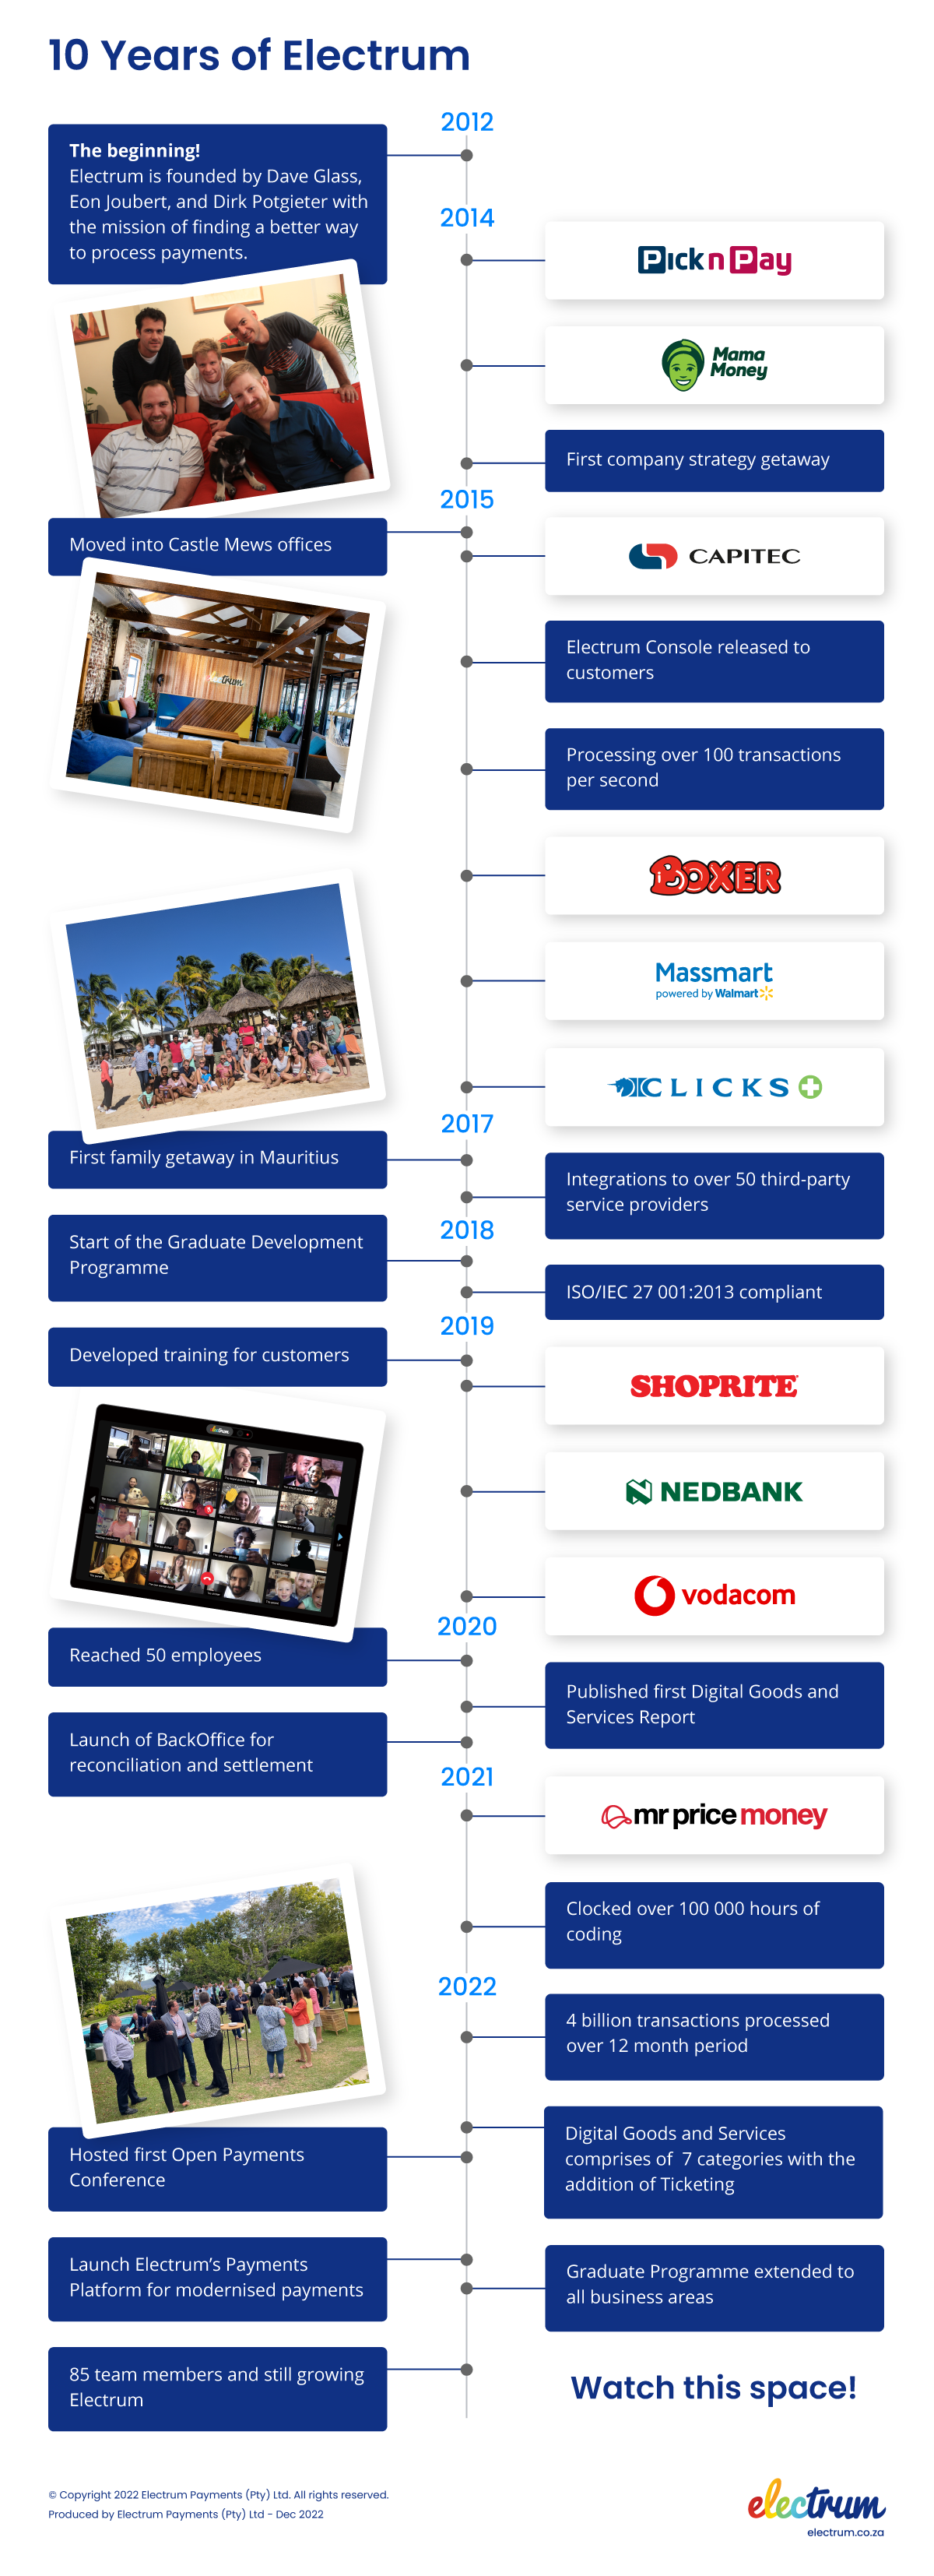 A timeline of major milestones in Electrum's decade-long journey, from 2012 to 2022